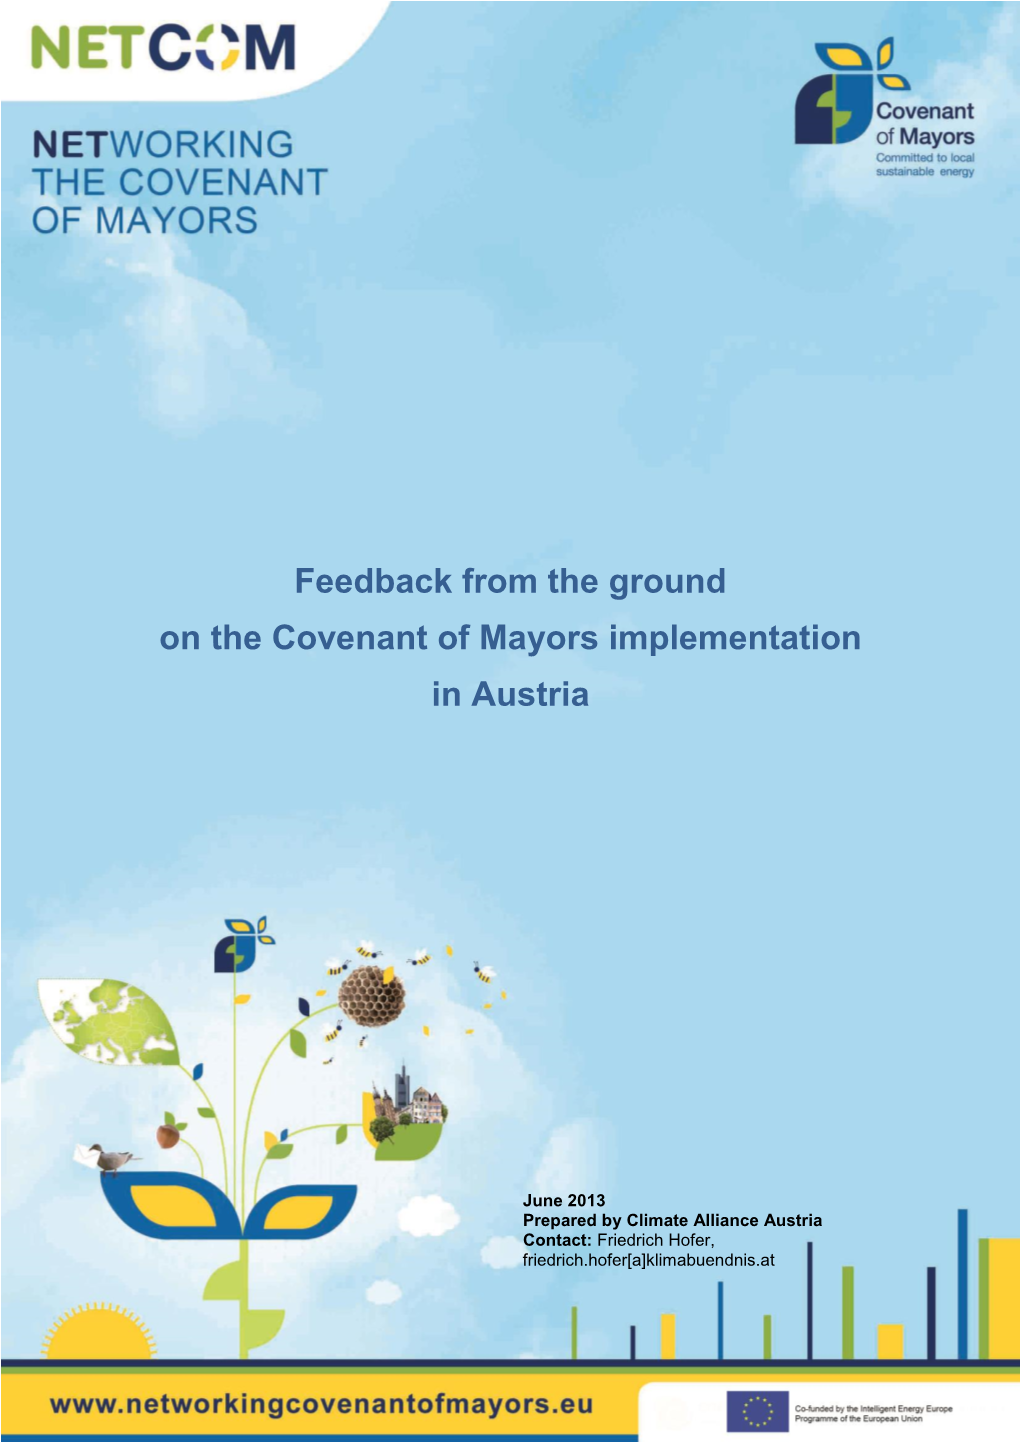 Feedback from the Ground on the Covenant of Mayors Implementation in Austria